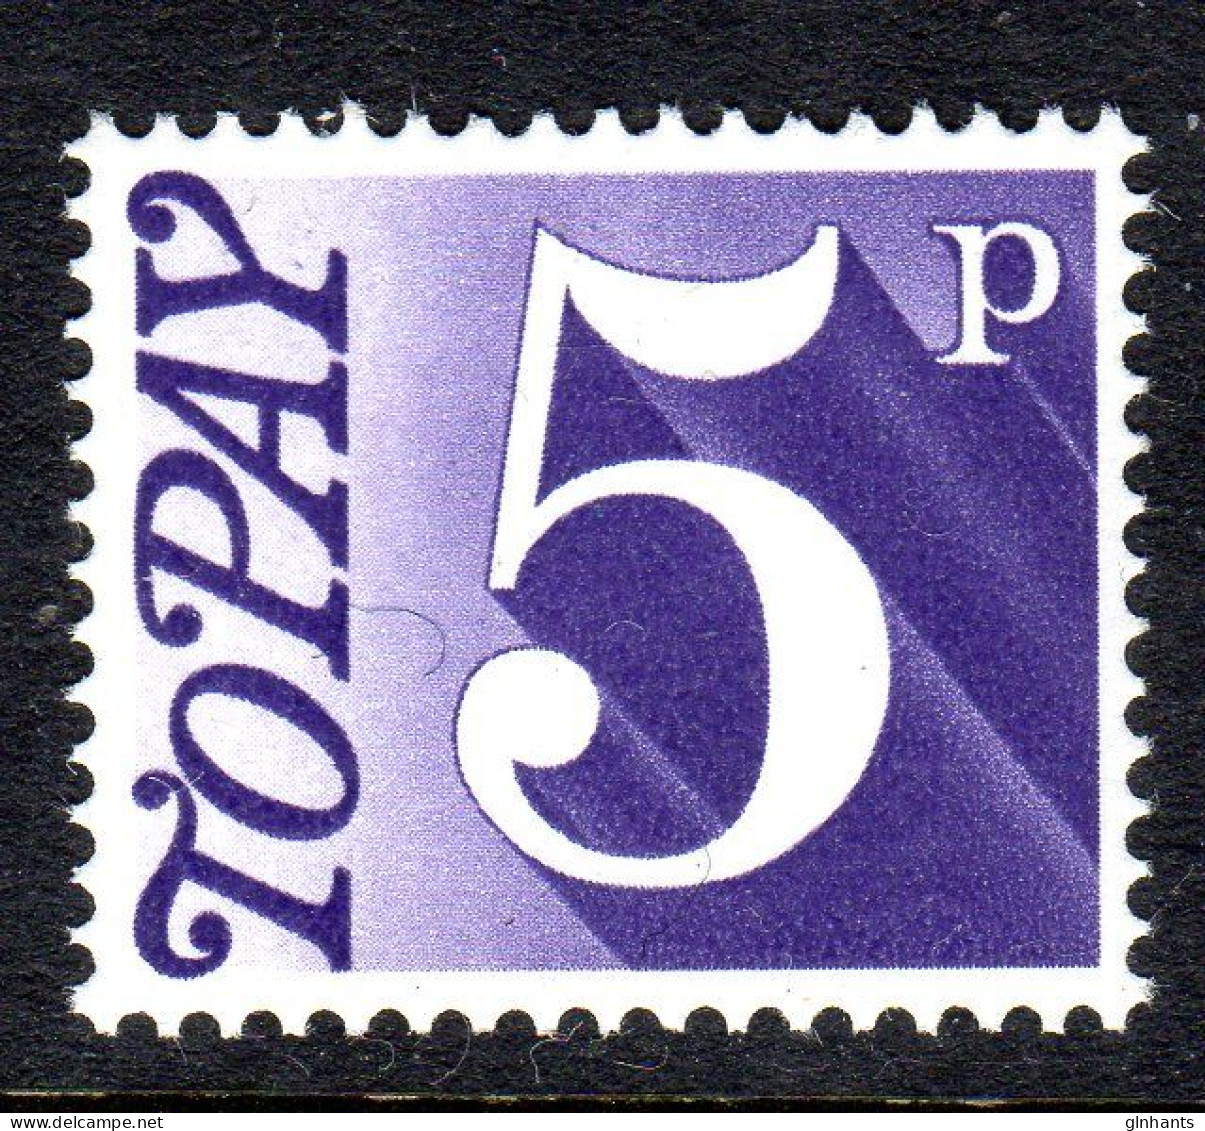 GREAT BRITAIN GB - 1970 POSTAGE DUE 5p STAMP FINE MNH ** SG D82 - Postage Due